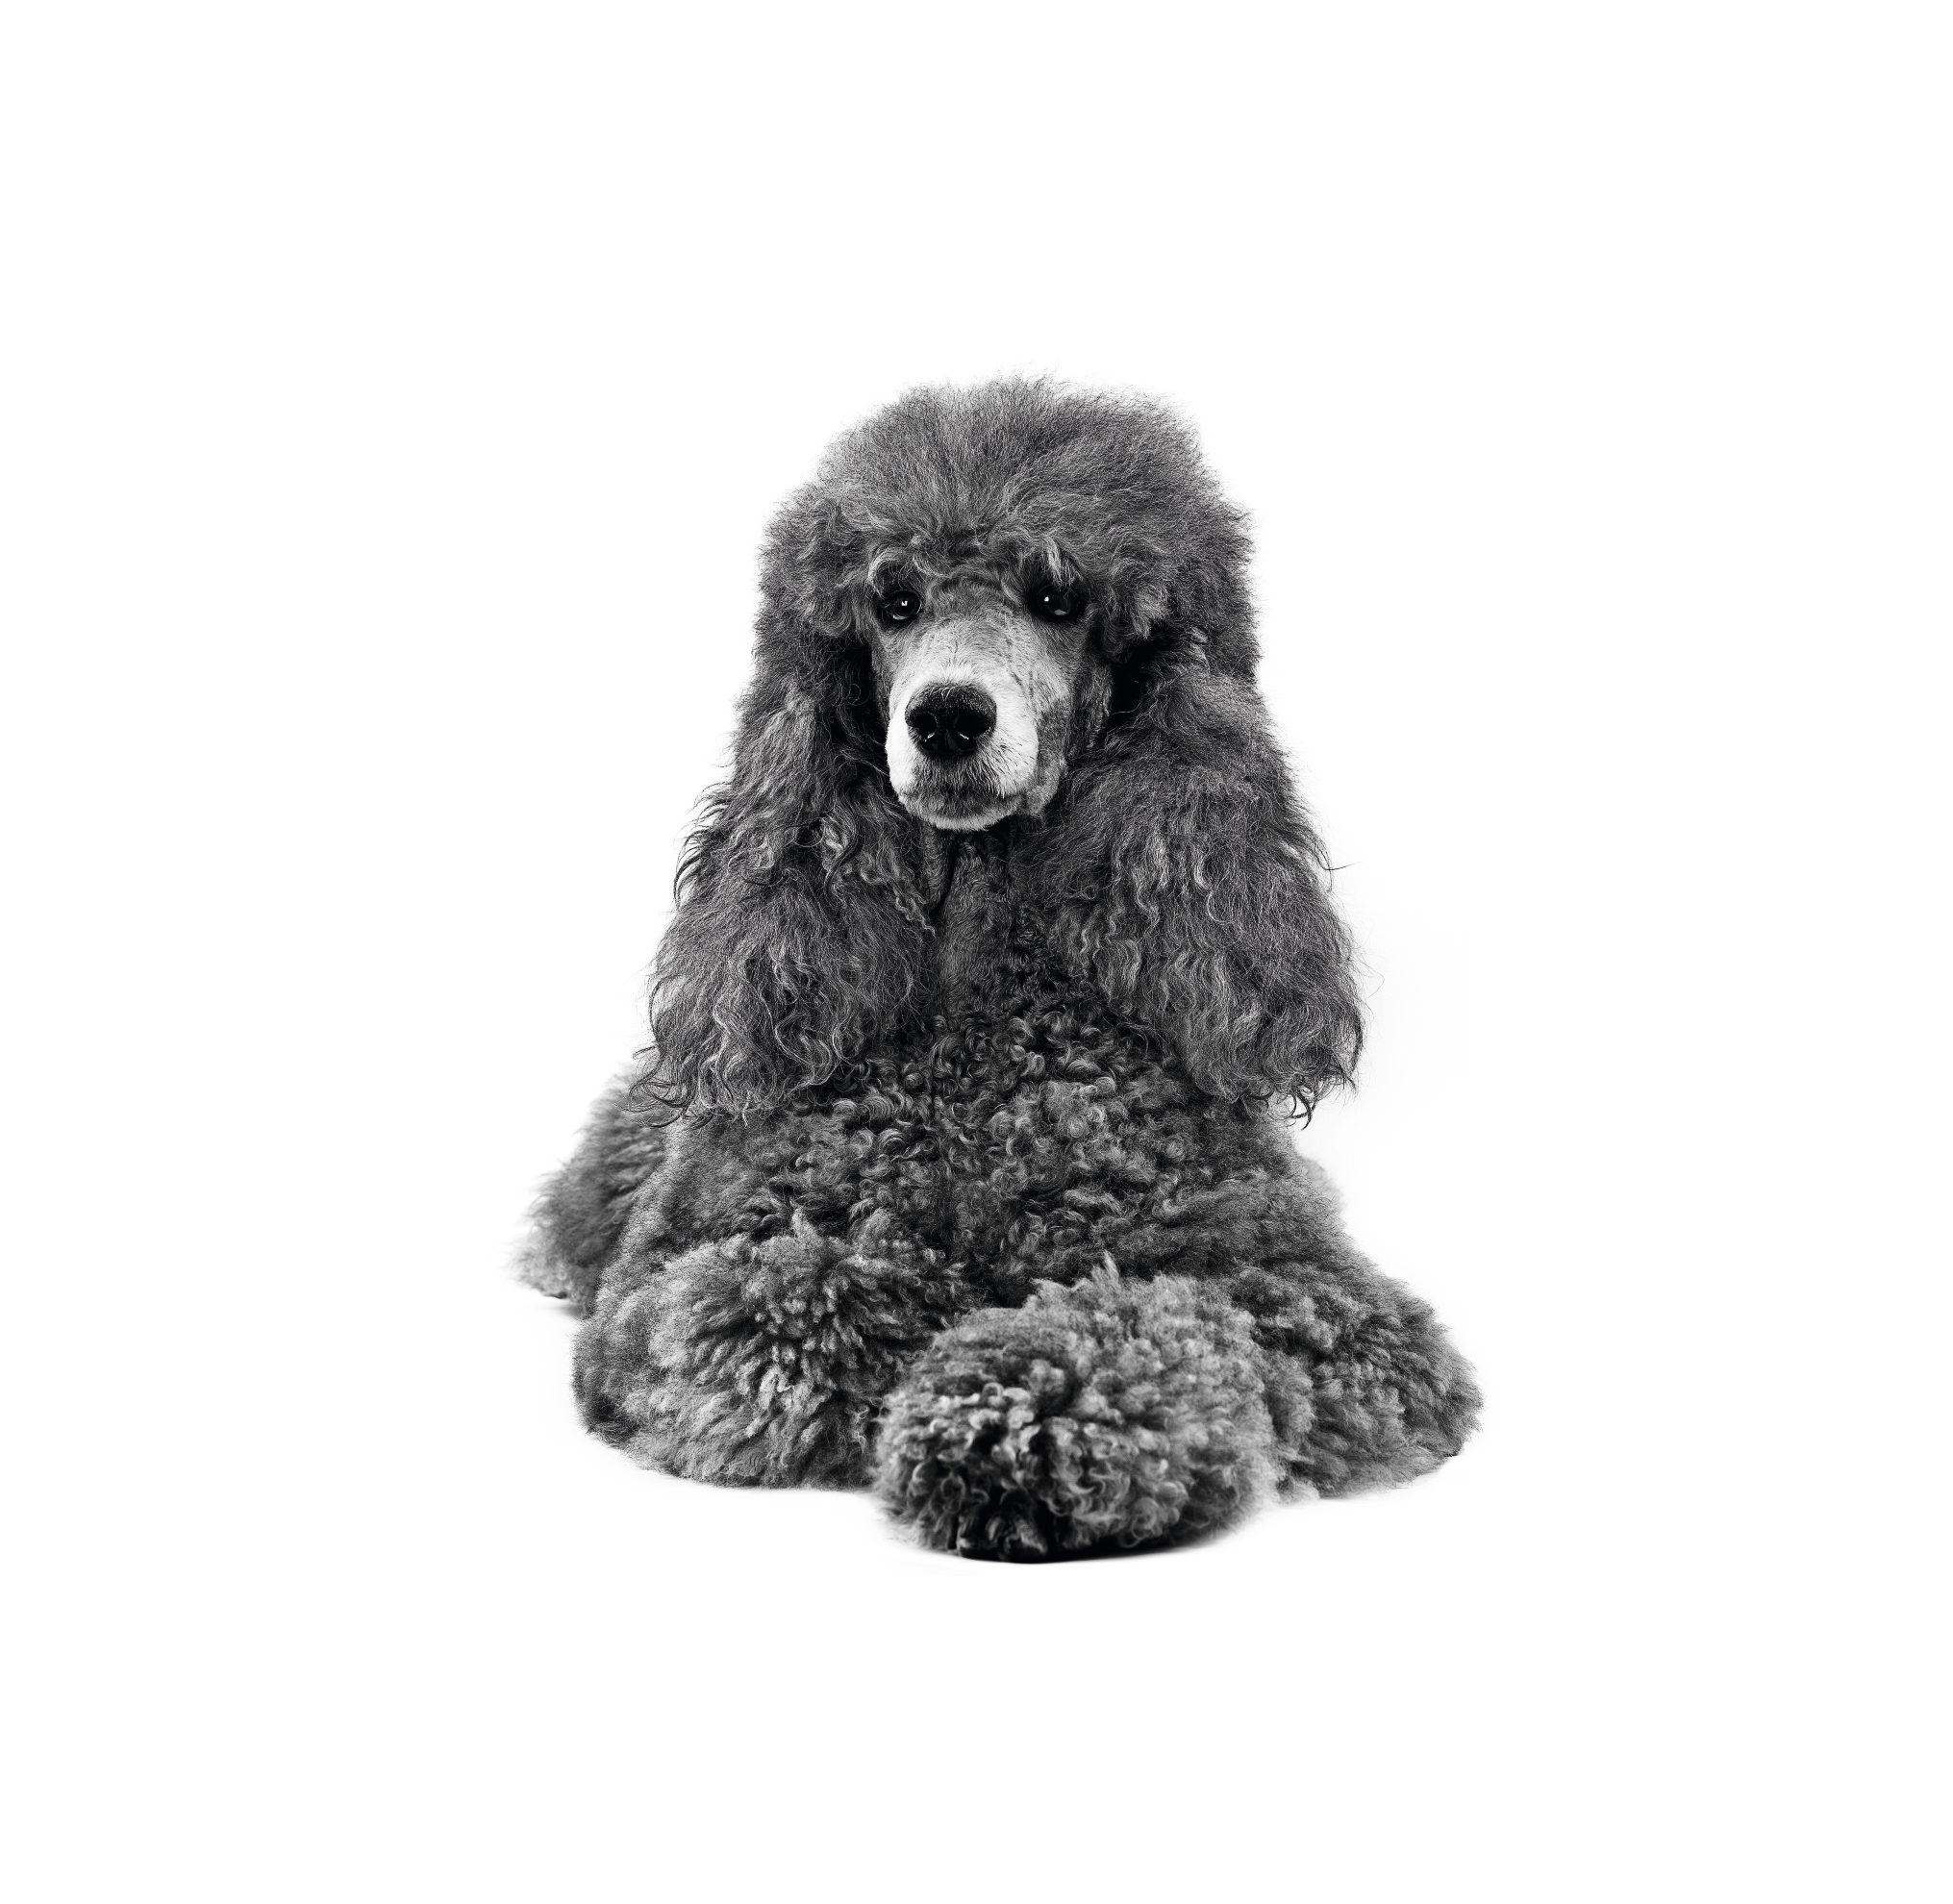 Black and white poodle laying down